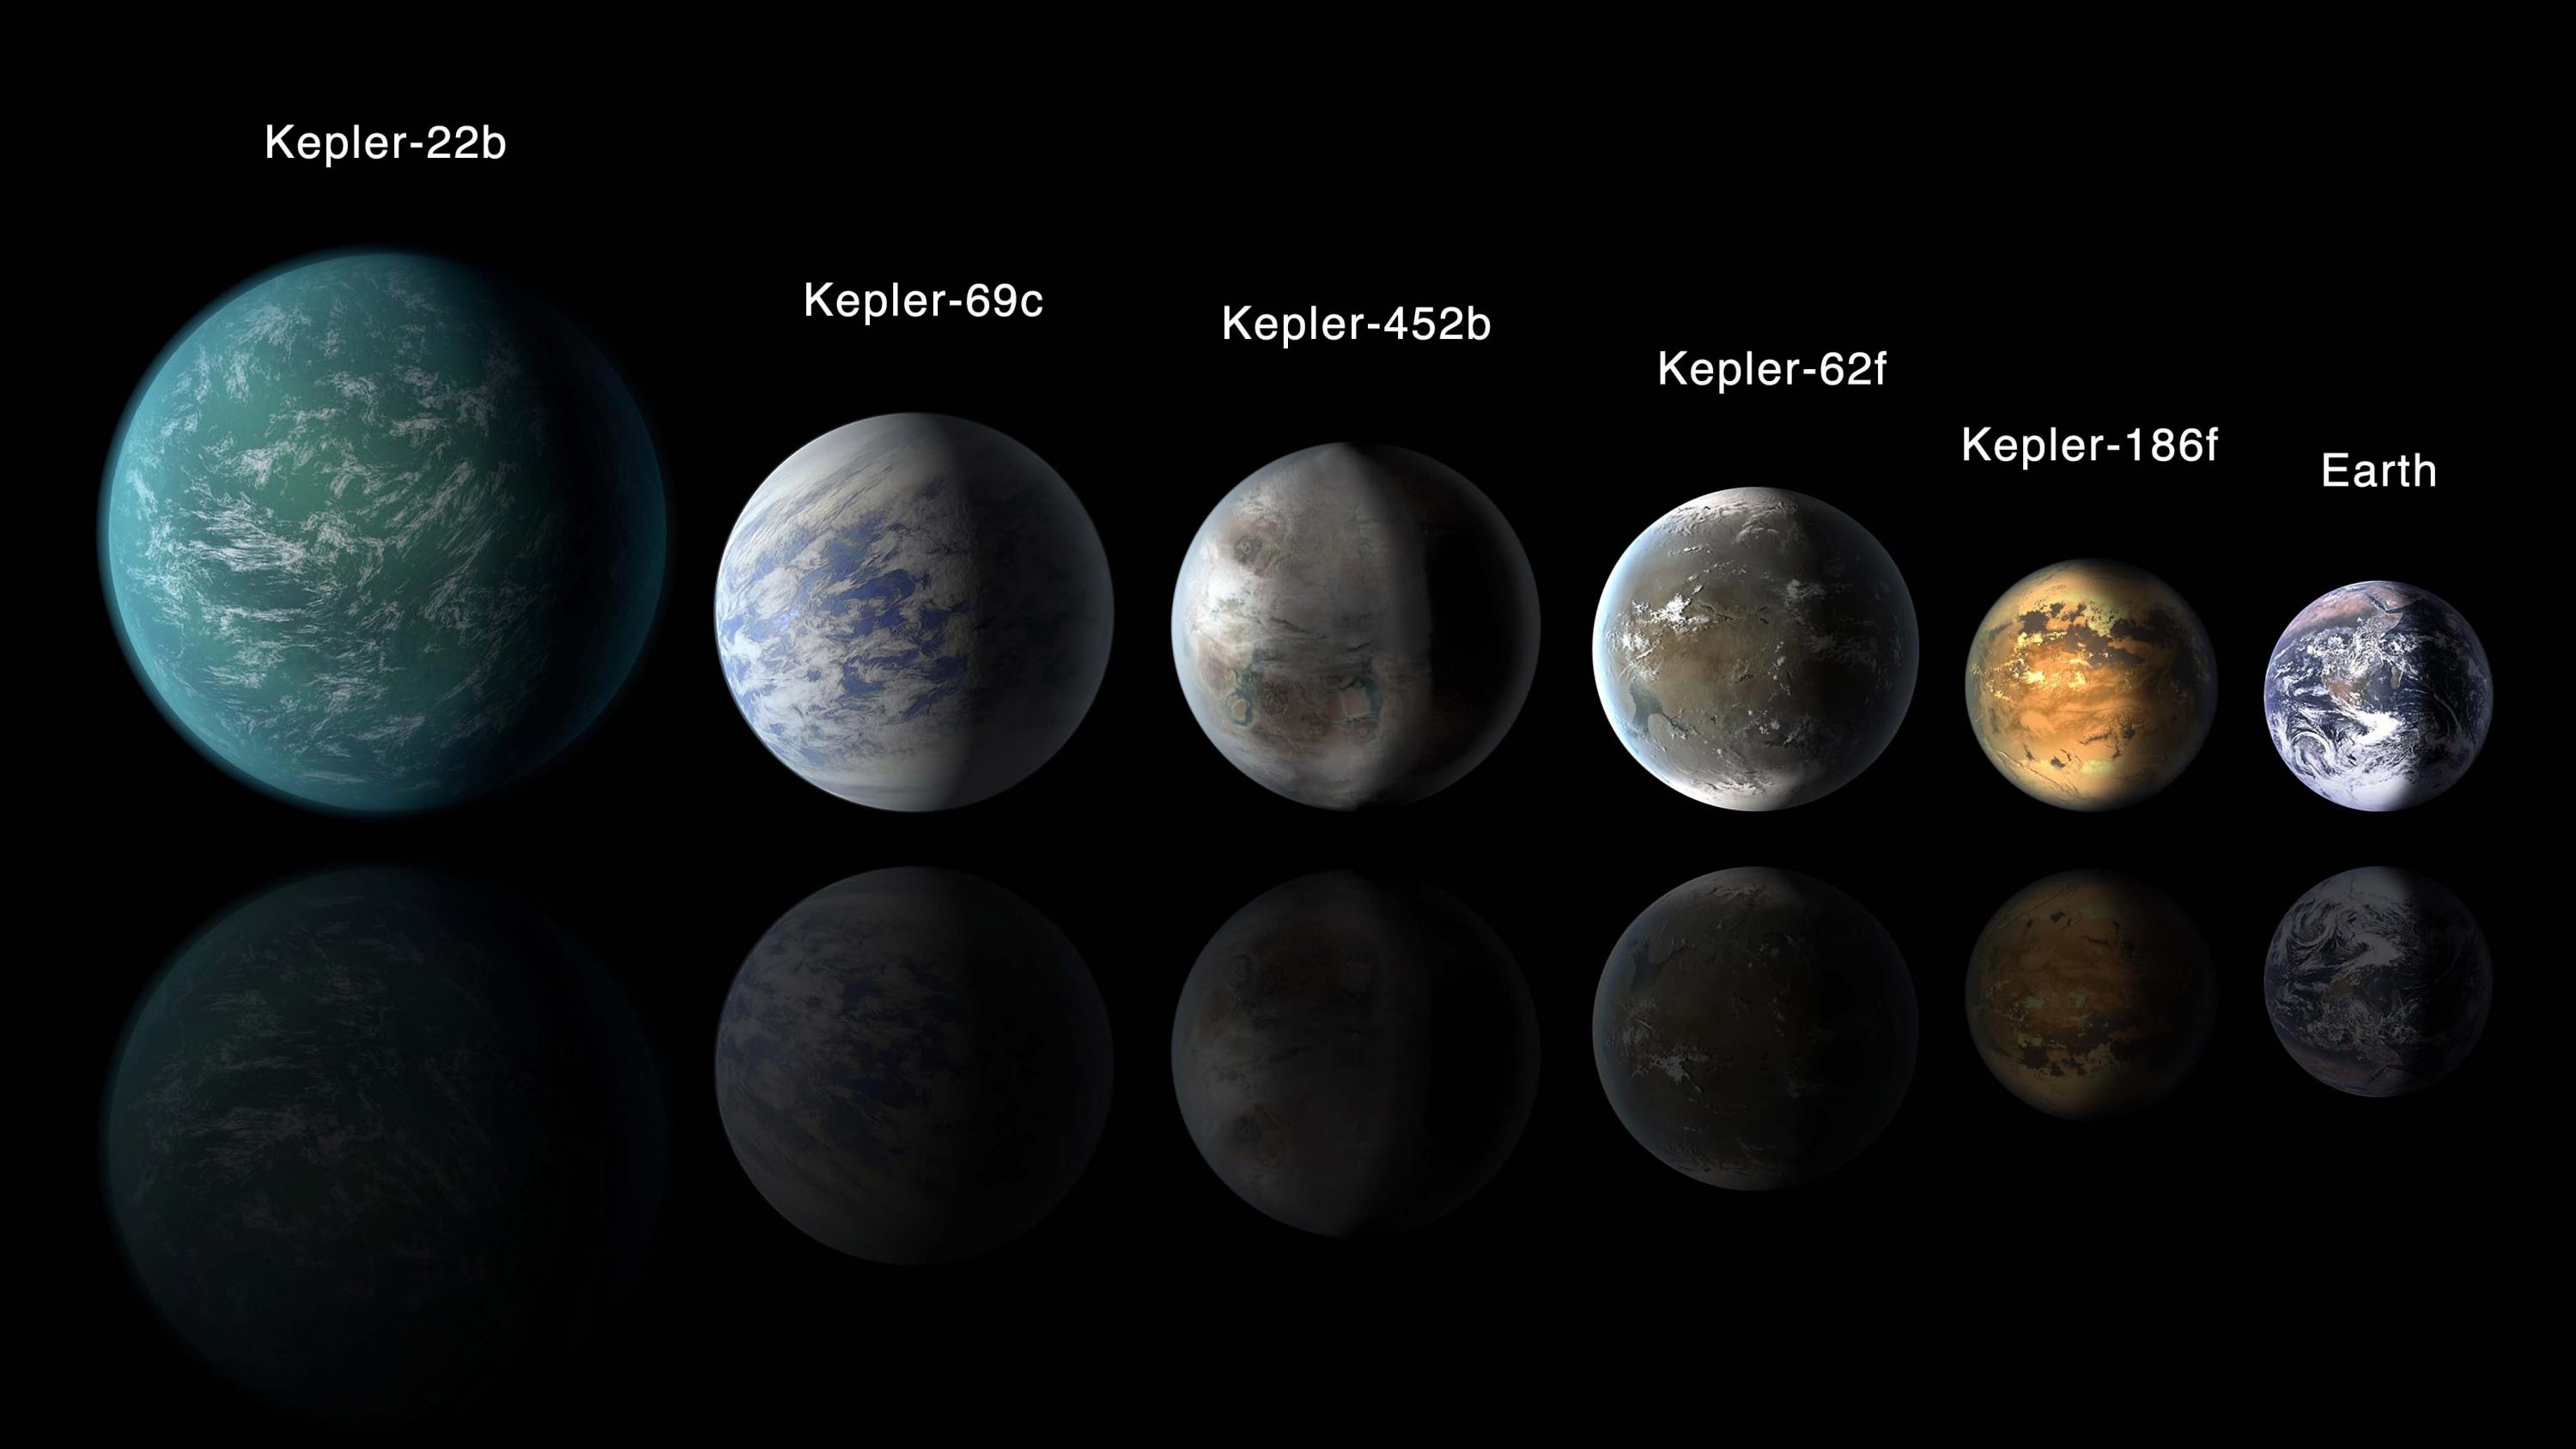 Finding Another Earth: Candidate Lineup (Image by NASA)